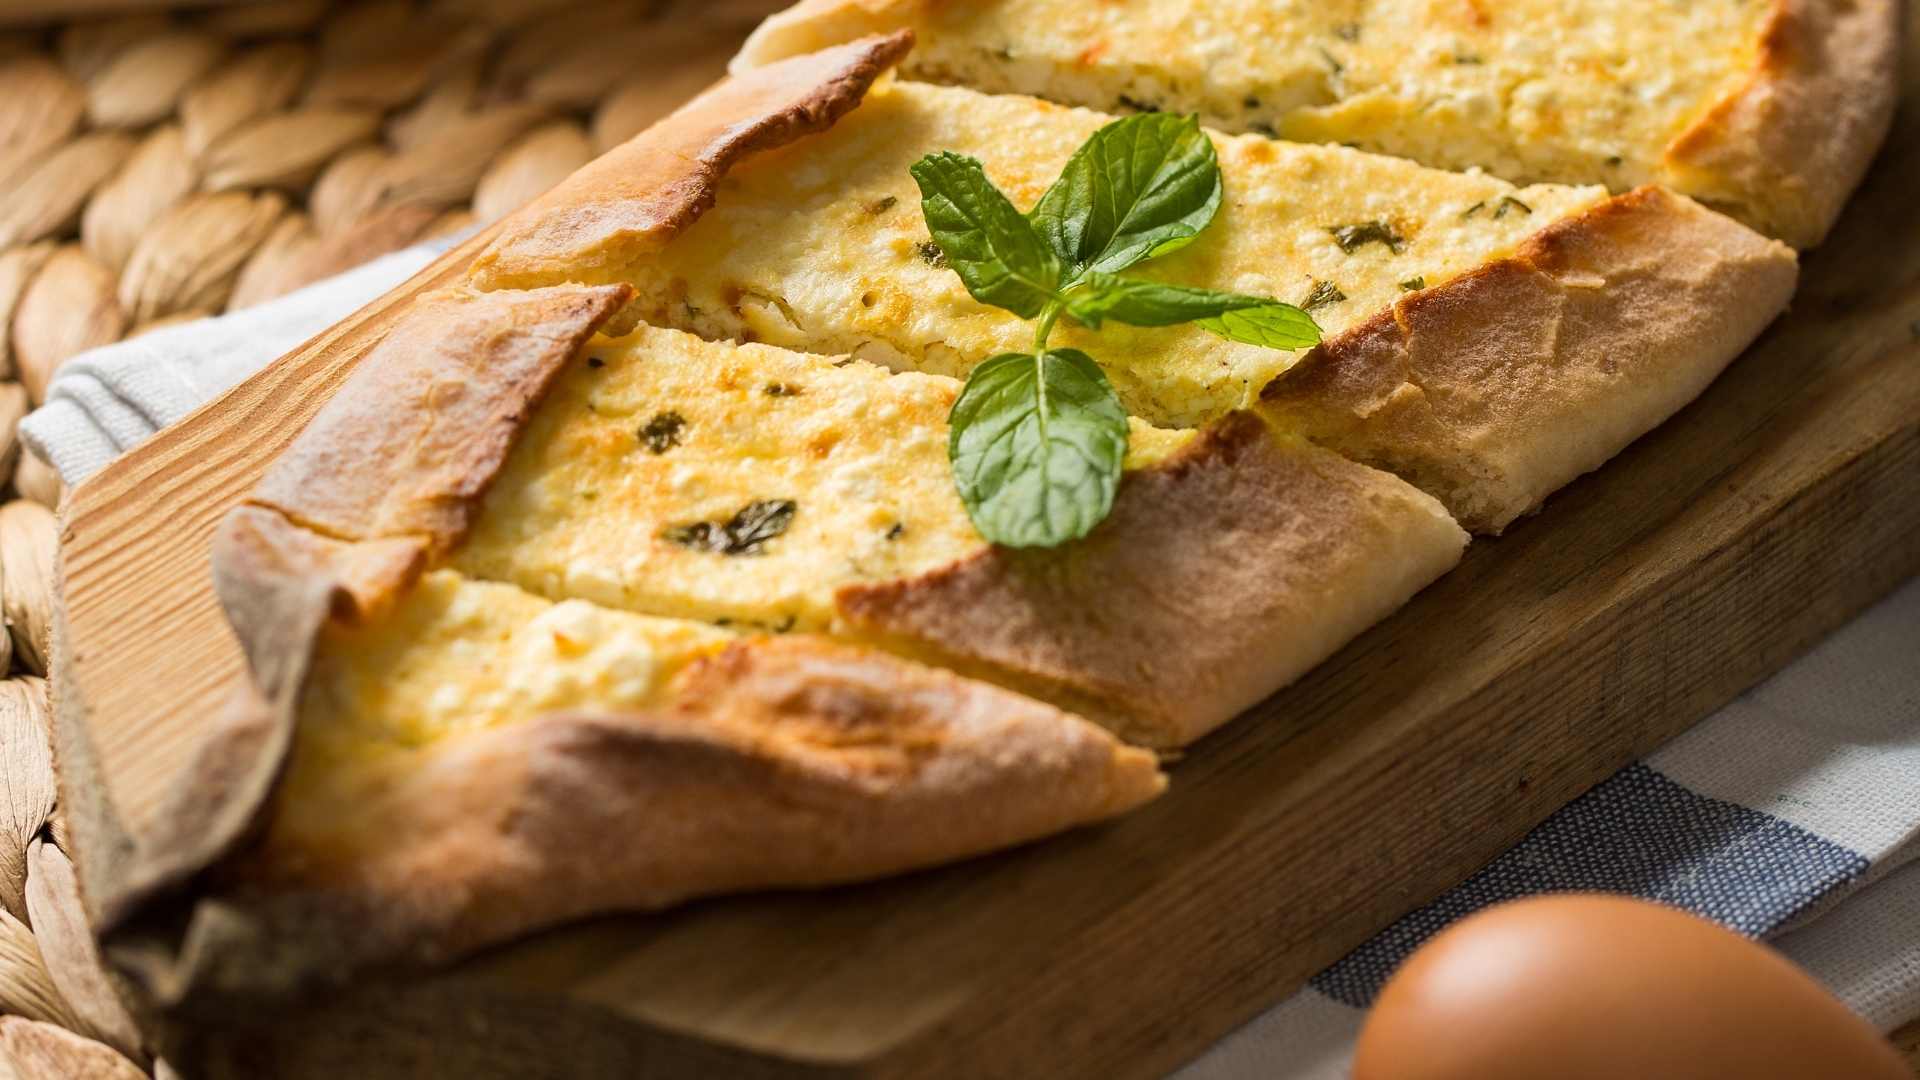 Cheese Lovers Rejoice This Mouth-Watering Cheese Pide Recipe Will Leave You Craving More 4